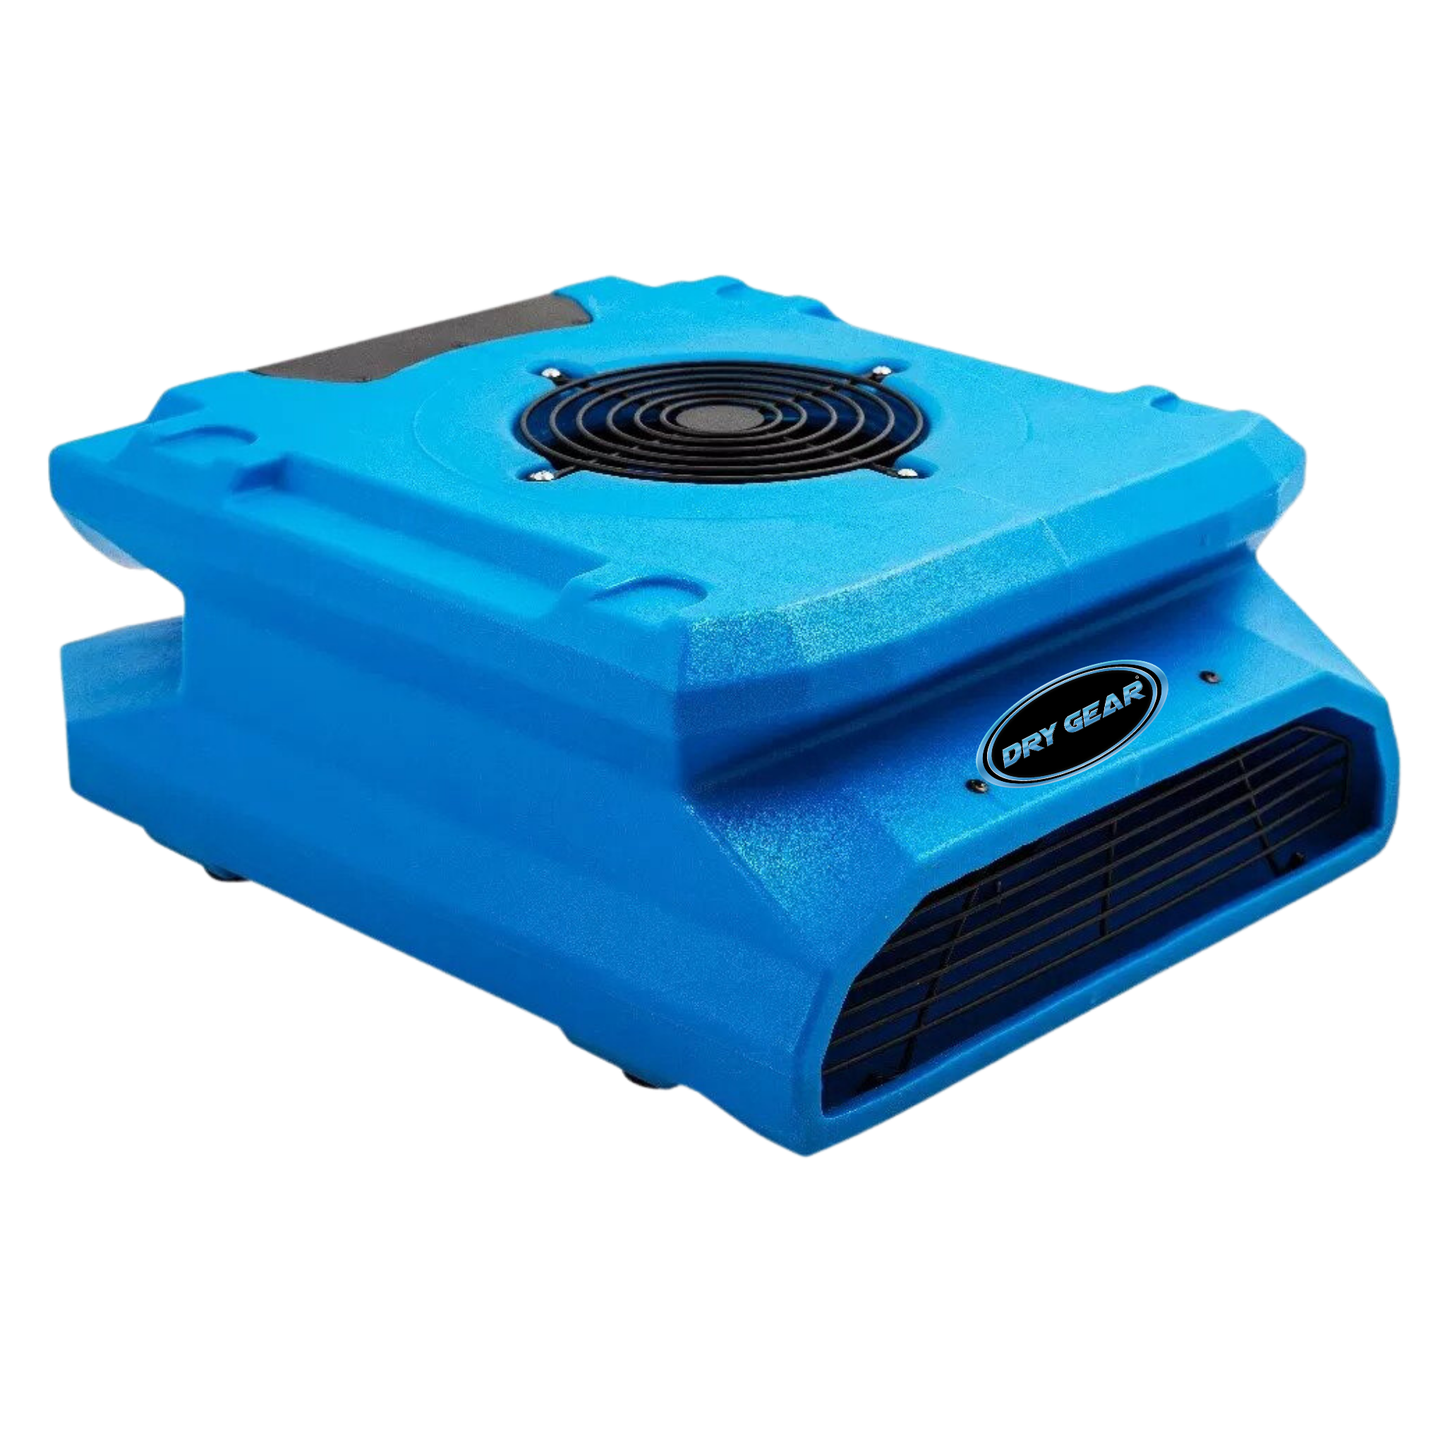 Dry Gear DG1100 CFM Low Profile Air Mover with GFCI Outlet - Powerhouse Performance for Efficient Drying and Ventilation Misc Blue